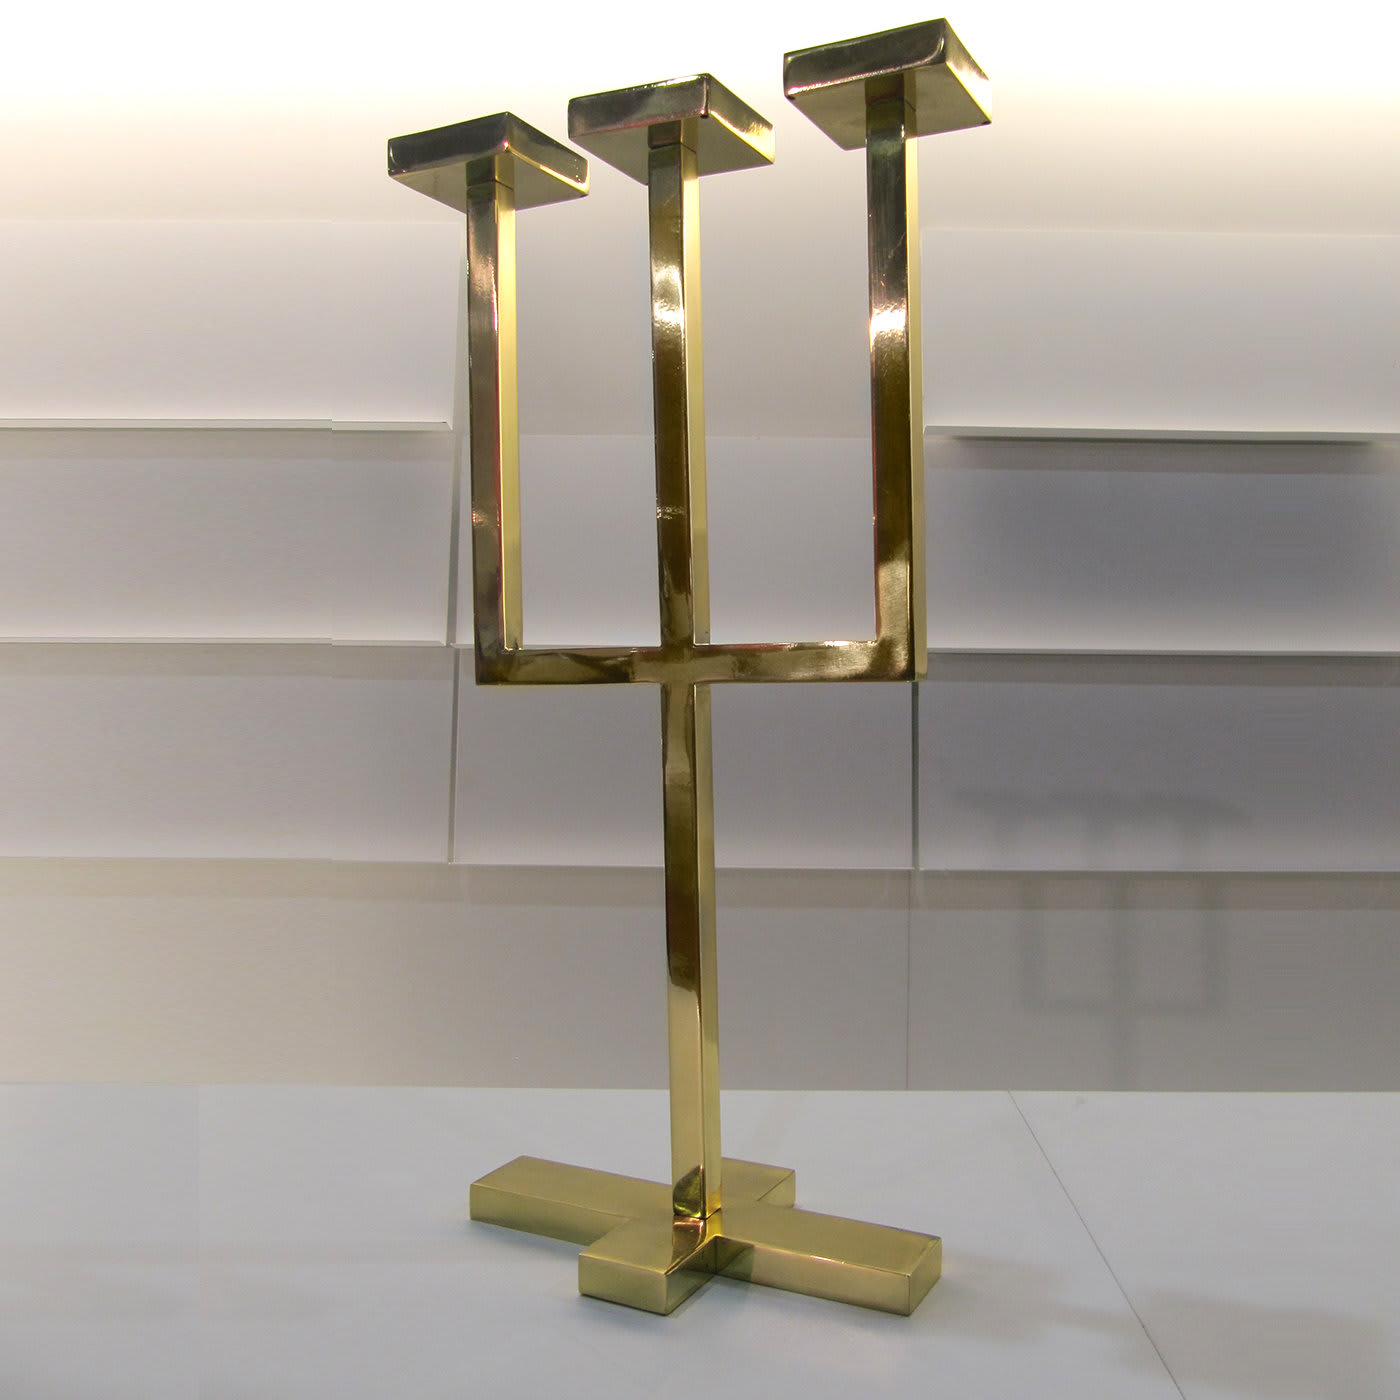 Forch Three-Candle Holder - Nicola Falcone